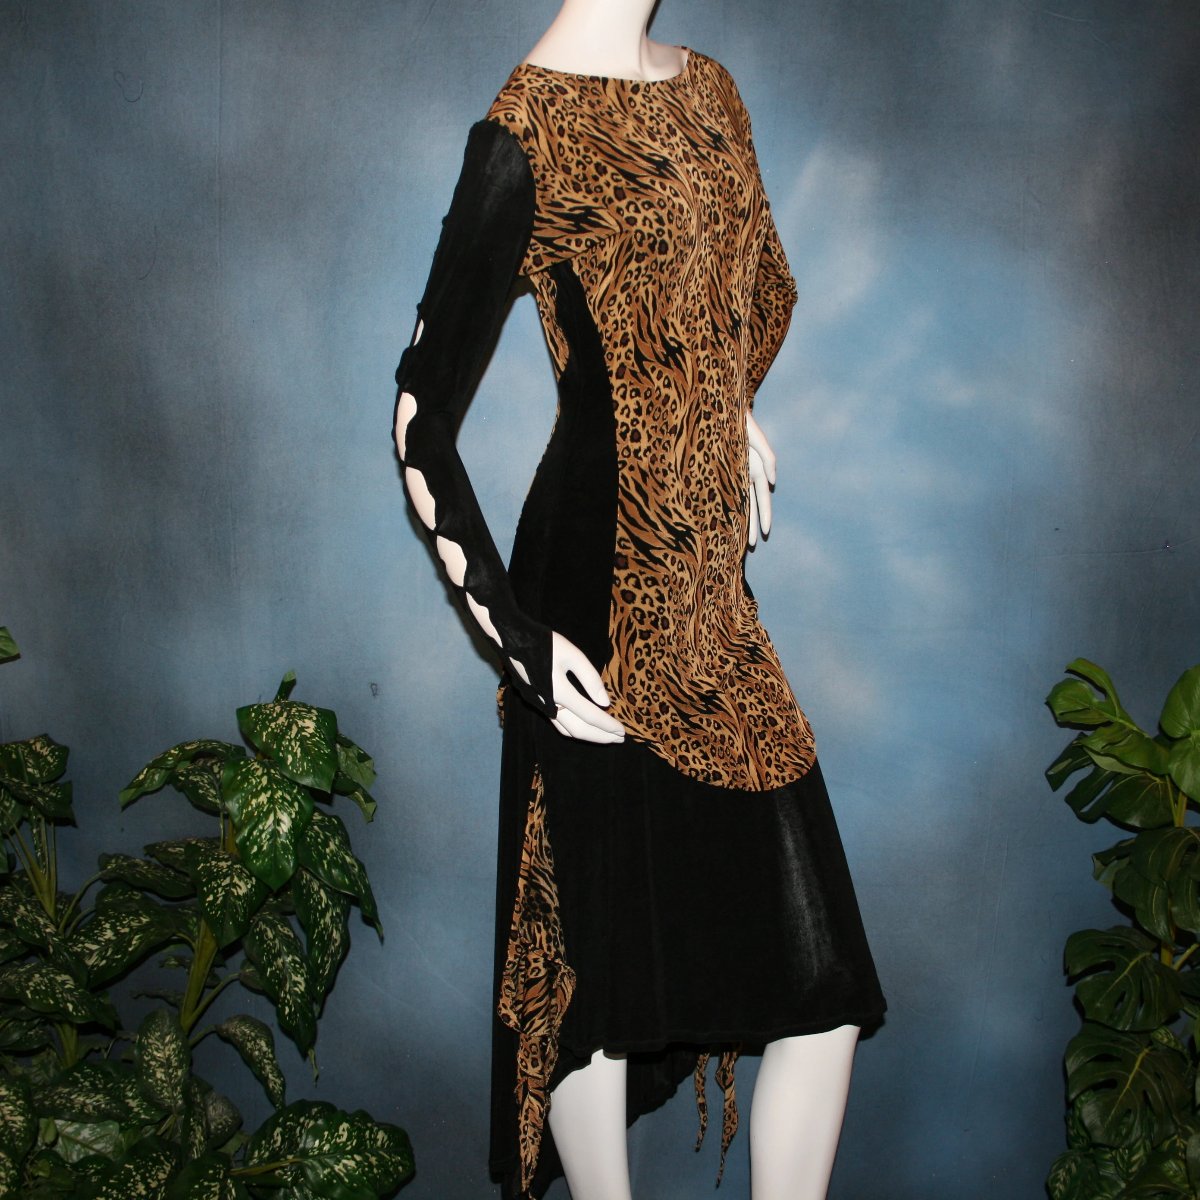 cloes side view of Ballroom social slinky dance set consisting of a black slinky Latin/rhythm skirt with serengeti print slinky & matching tunic top with color blocking & open detailing work in the long sleeves. The tunic top can be worn separately as a Latin/rhythm dress with dance trunks or a shorter little skirt can be custom made to go with it for an extra fee. You can also team the slinky tunic with pants. This slinky Latin/rhythm skirt & top is great for ballroom teachers!